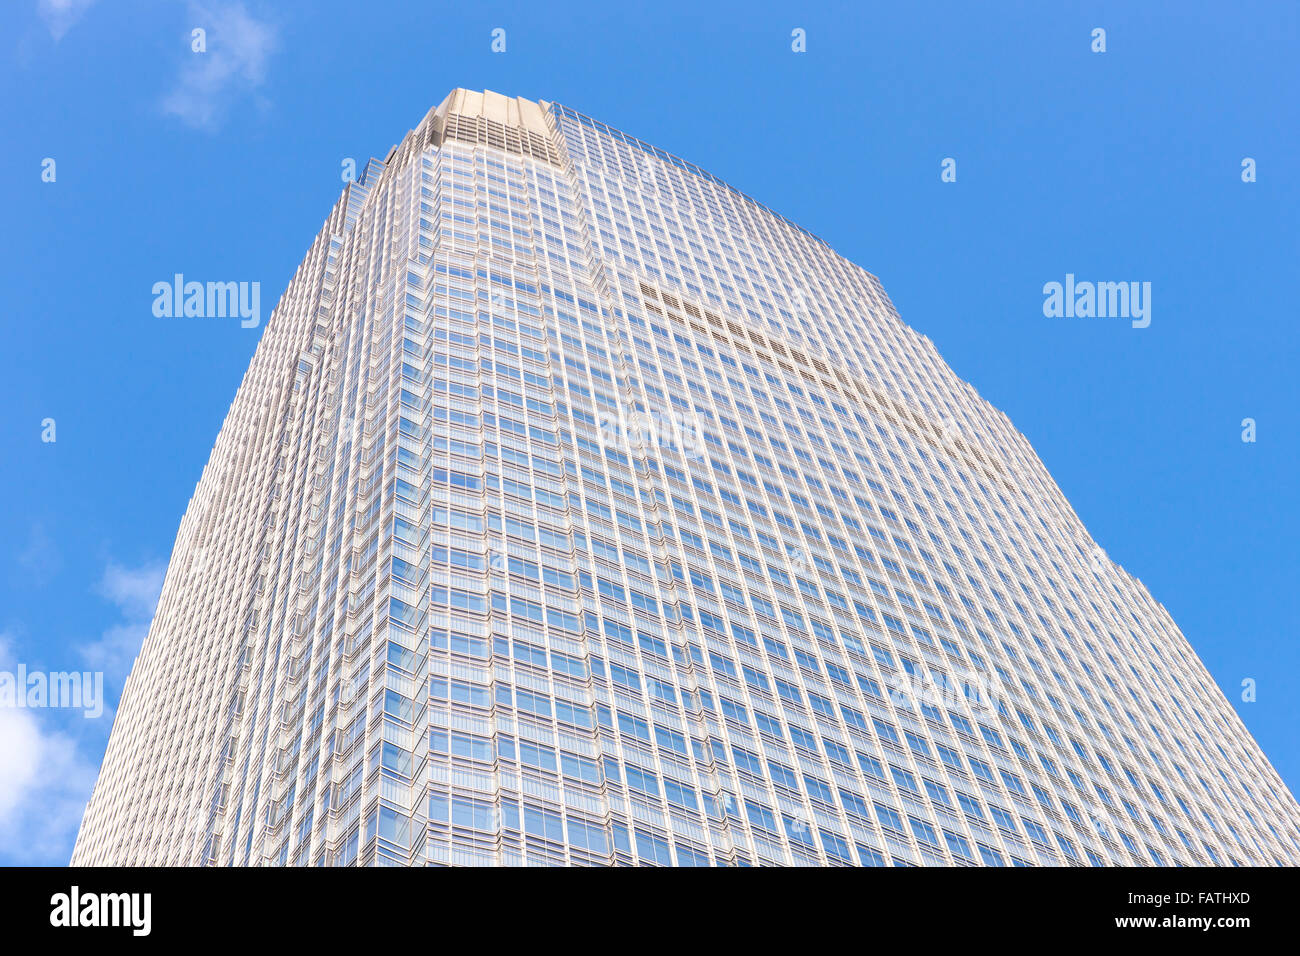 A view looking up of 30 Hudson Street / the Goldman Sachs Tower in Jersey City, the tallest building in New Jersey. Stock Photo